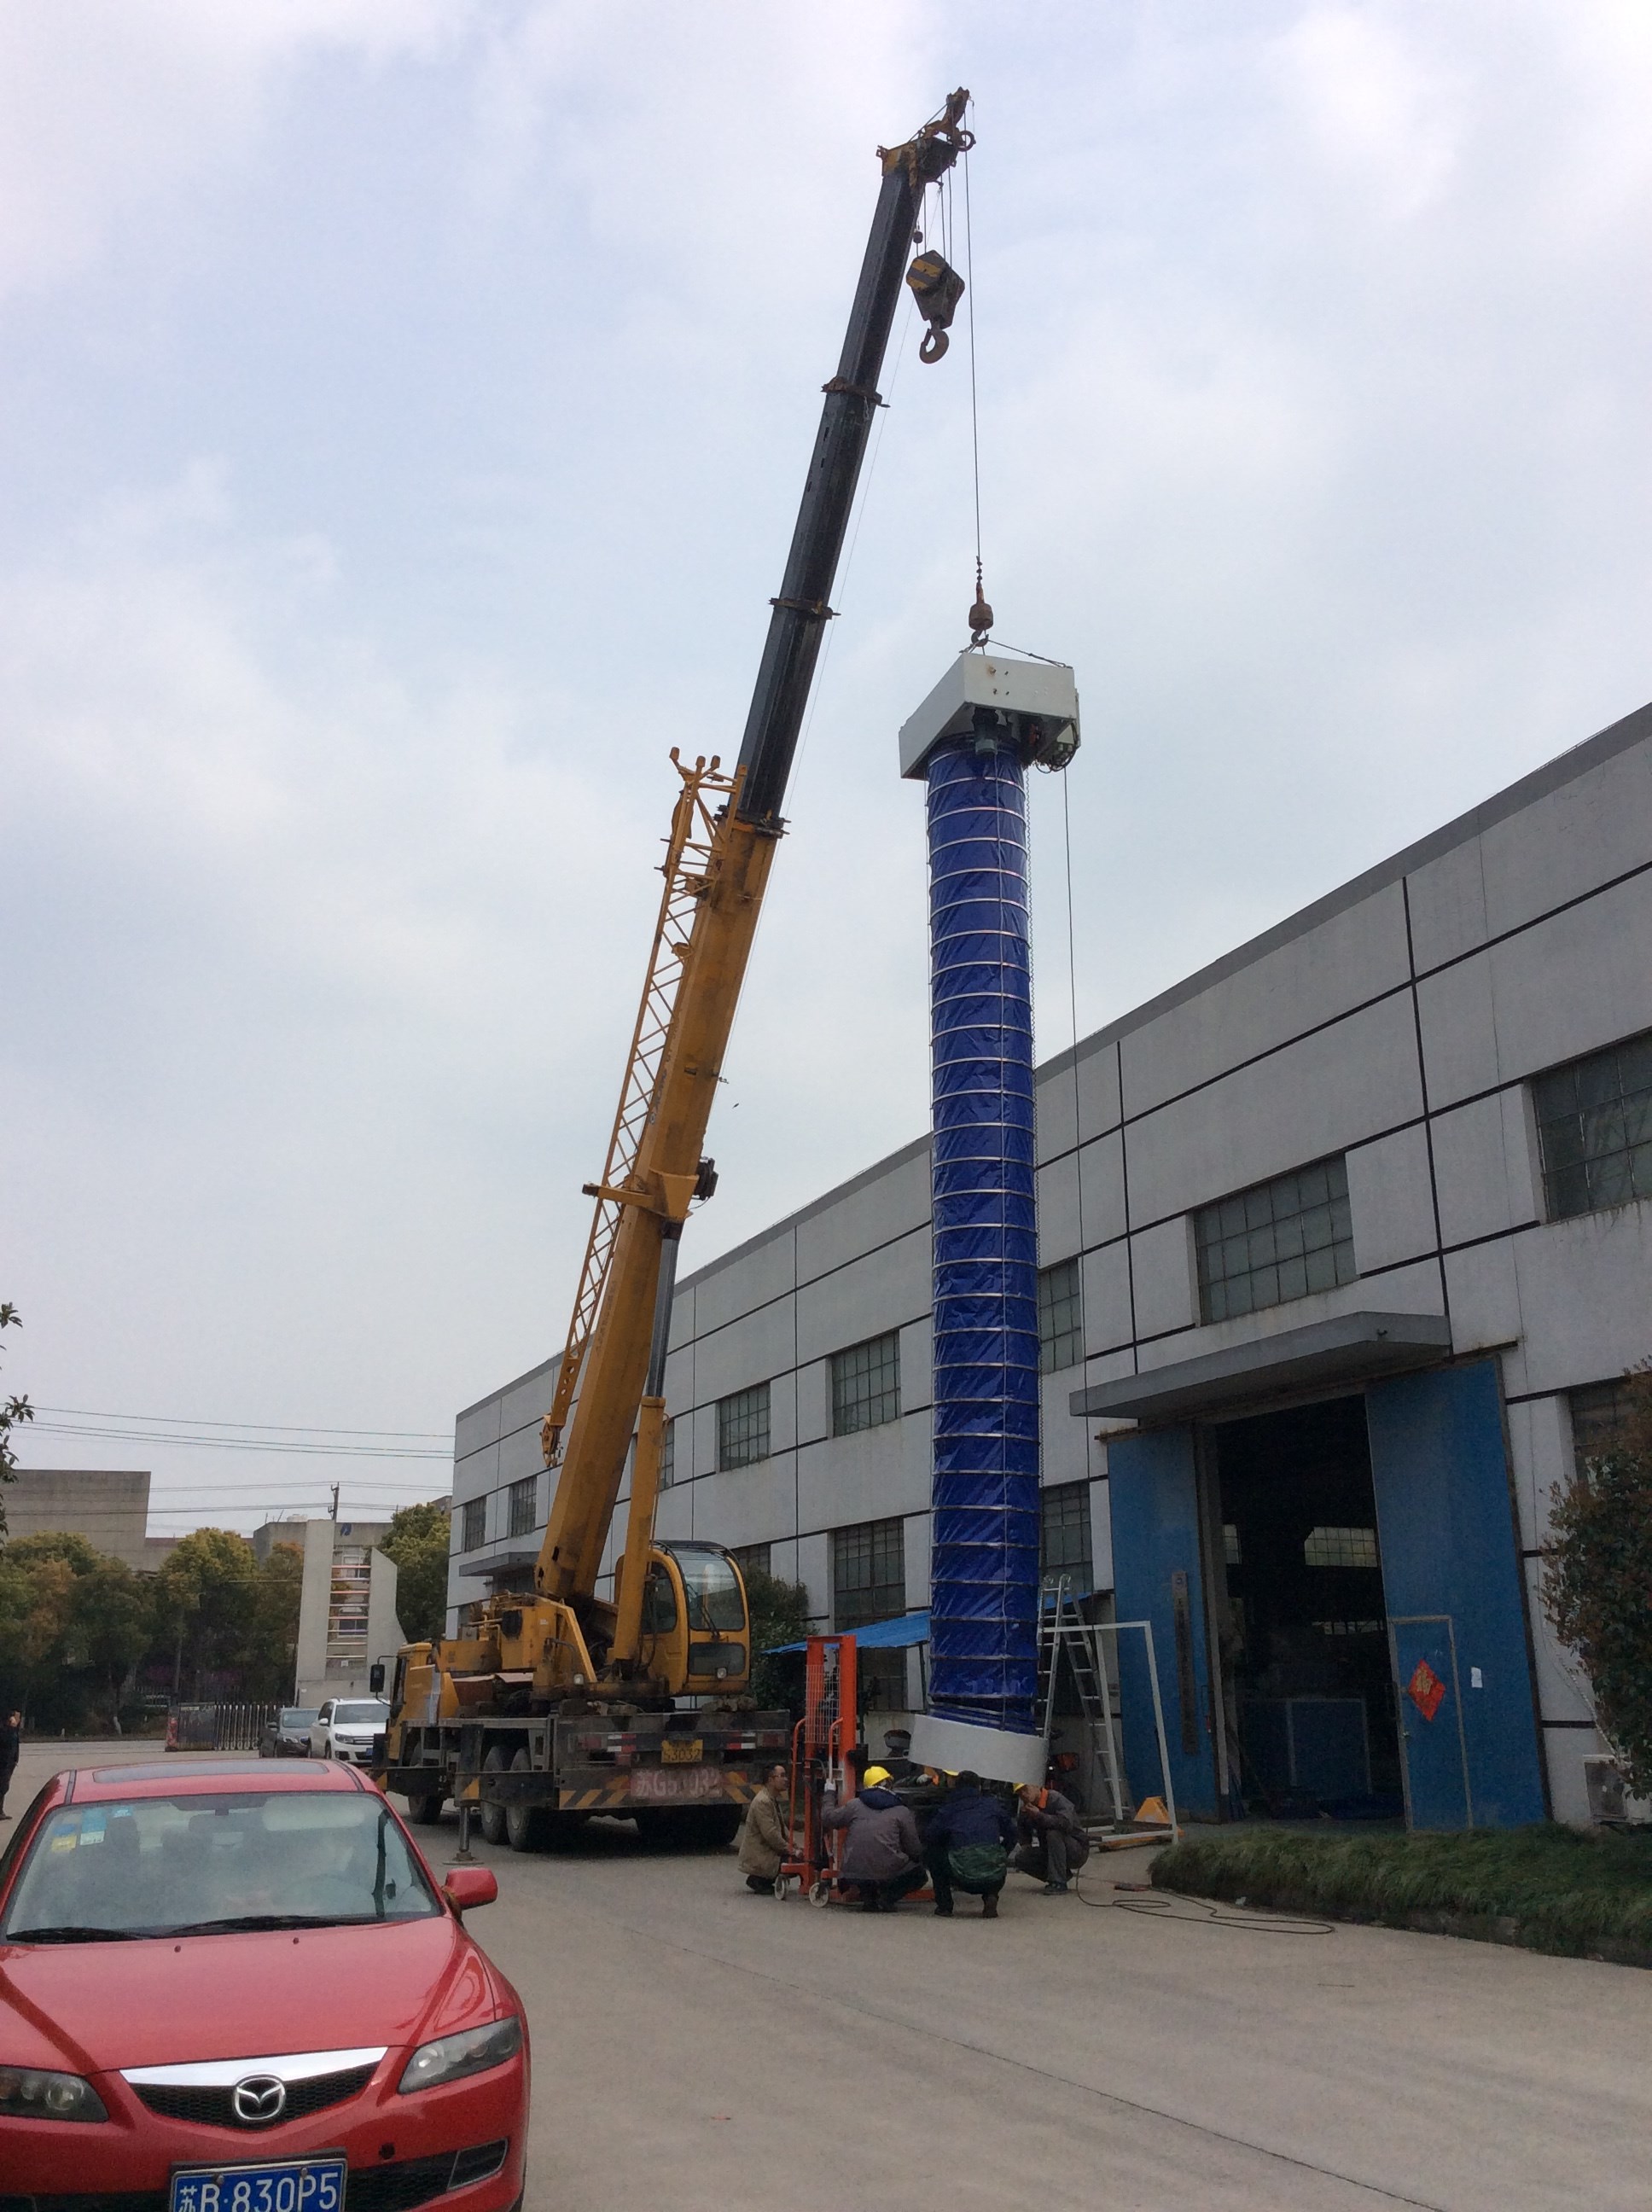 Telescopic Chute for Cement Loading Truck loading and Bagging Stations, Grain Loader Cement Loader Telescopic Chute Port Loading System Telescopic Chute Telescopic Conveyor telescopic loader grain loa